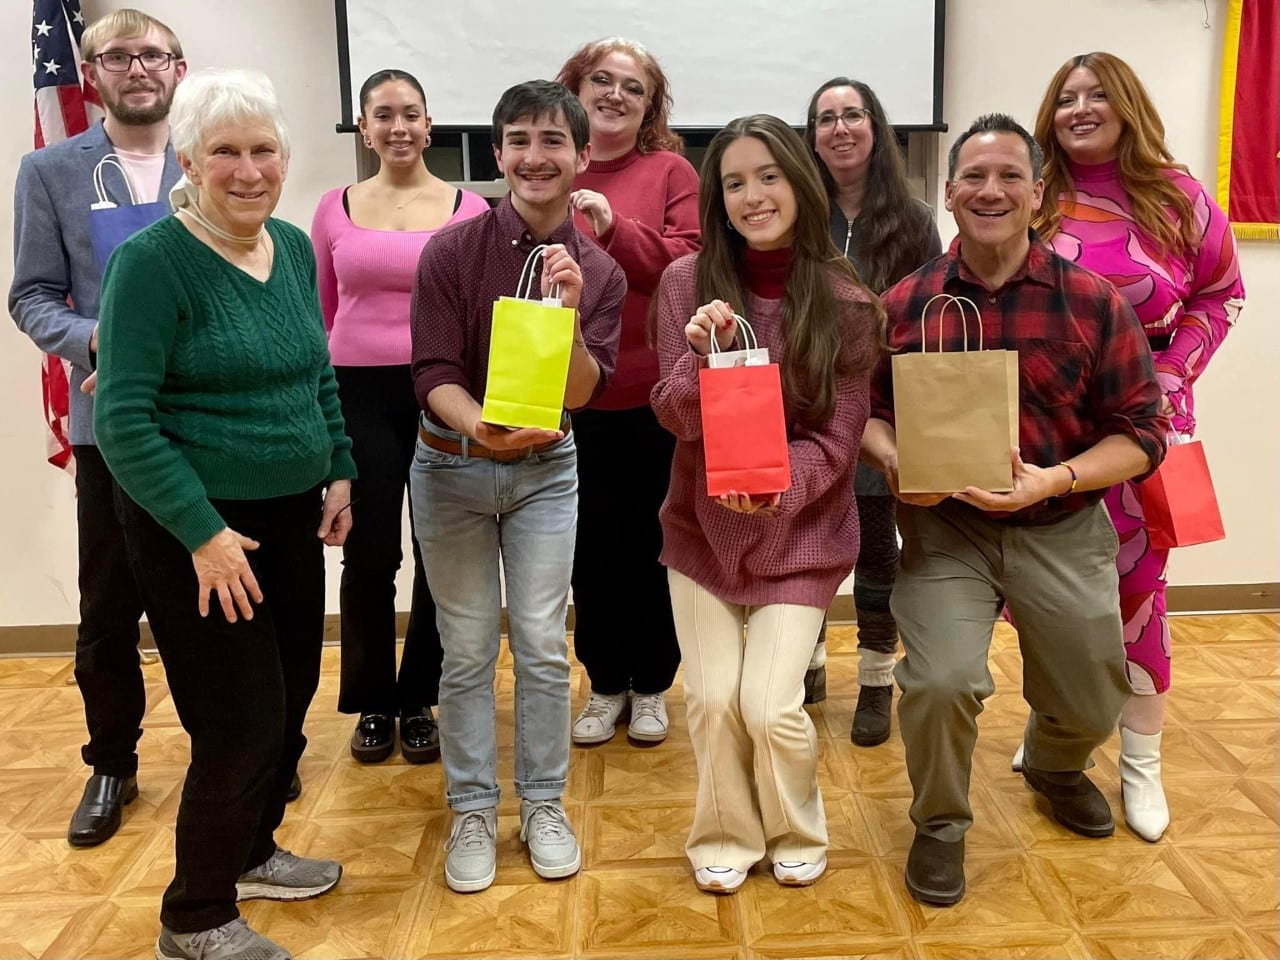 Humanists and Lab members stand together with personalized goodie bags from Tiya Cotter. The back row (from left to right) pictures Kyle Powell, Sarai Garcia, Emma Jerabek, Tiya Cotter, and Jacqueline Di Santo. The front row (from left to right) pictures Carol Auer, Ethan Eisebenberg, Julia Lombard, and Glenn Geher.